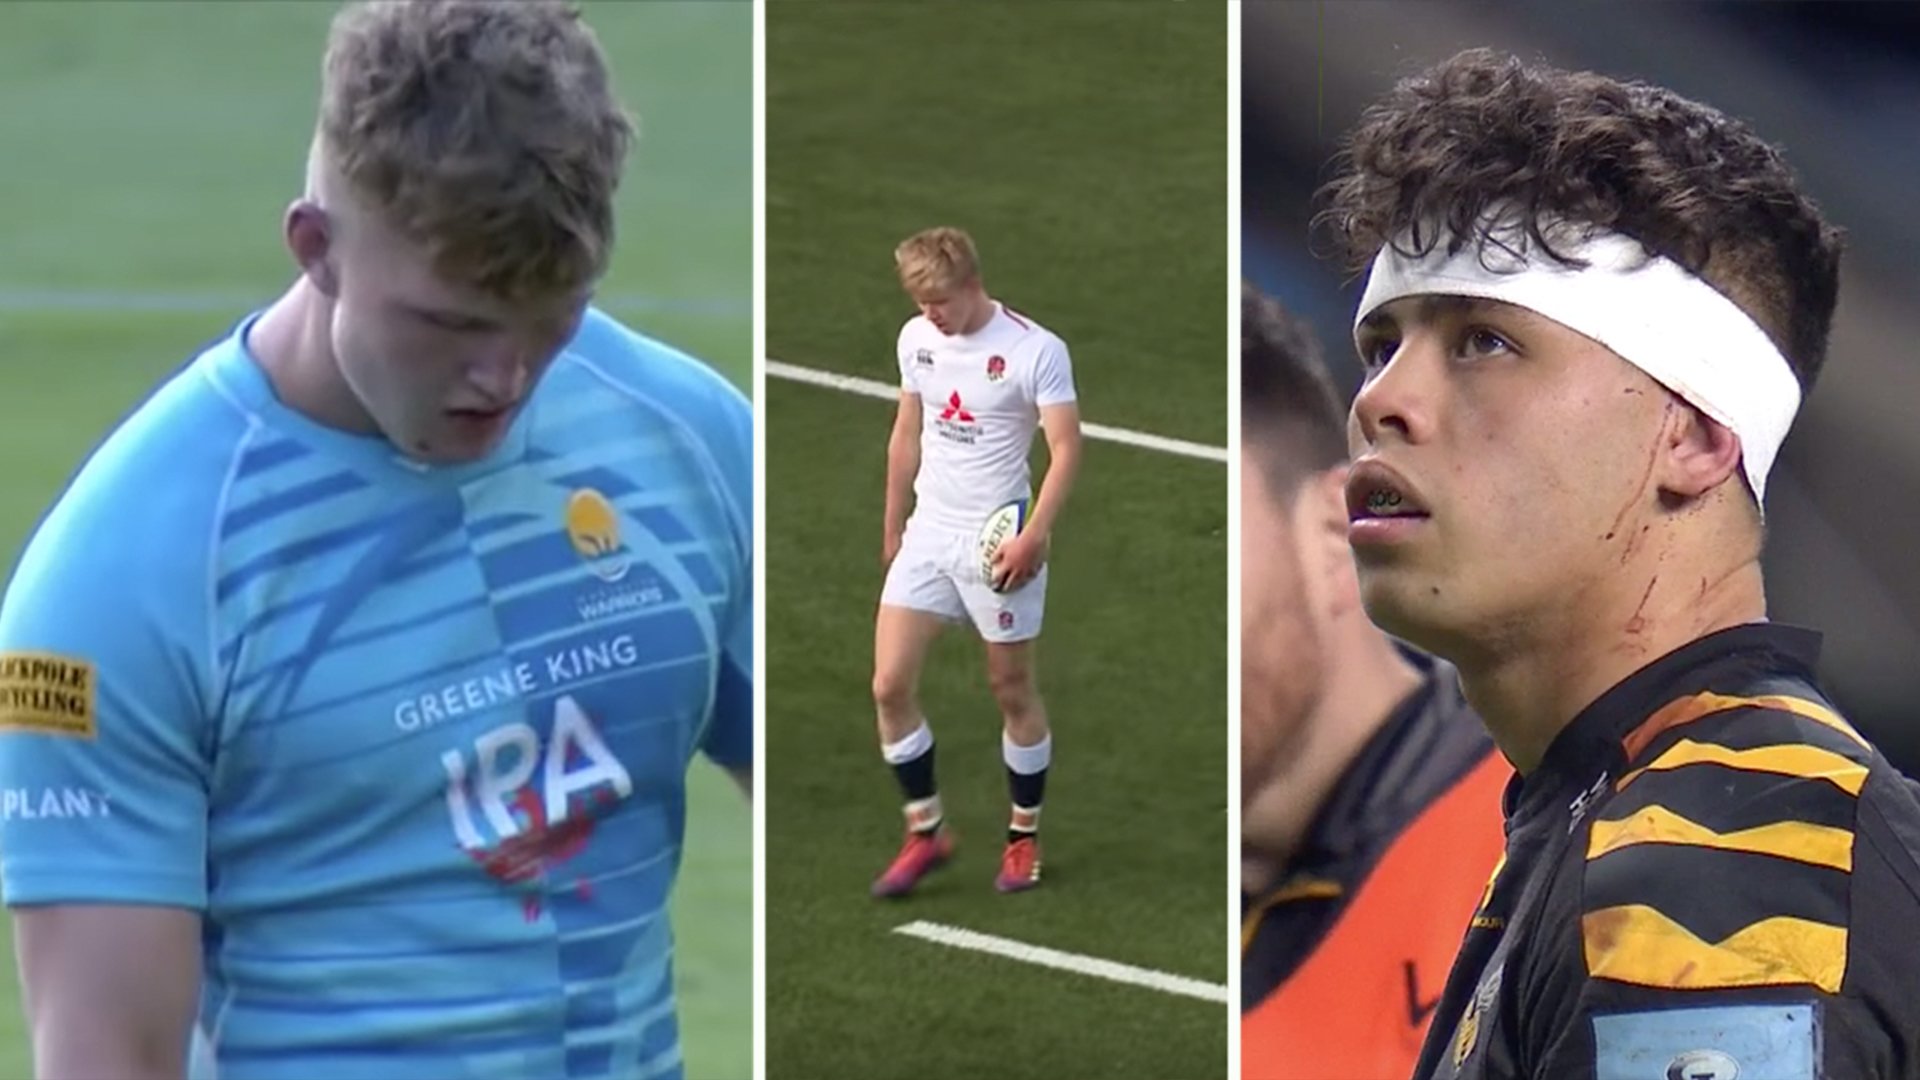 The highlight reels for the young new players in the England rugby team are seriously impressive